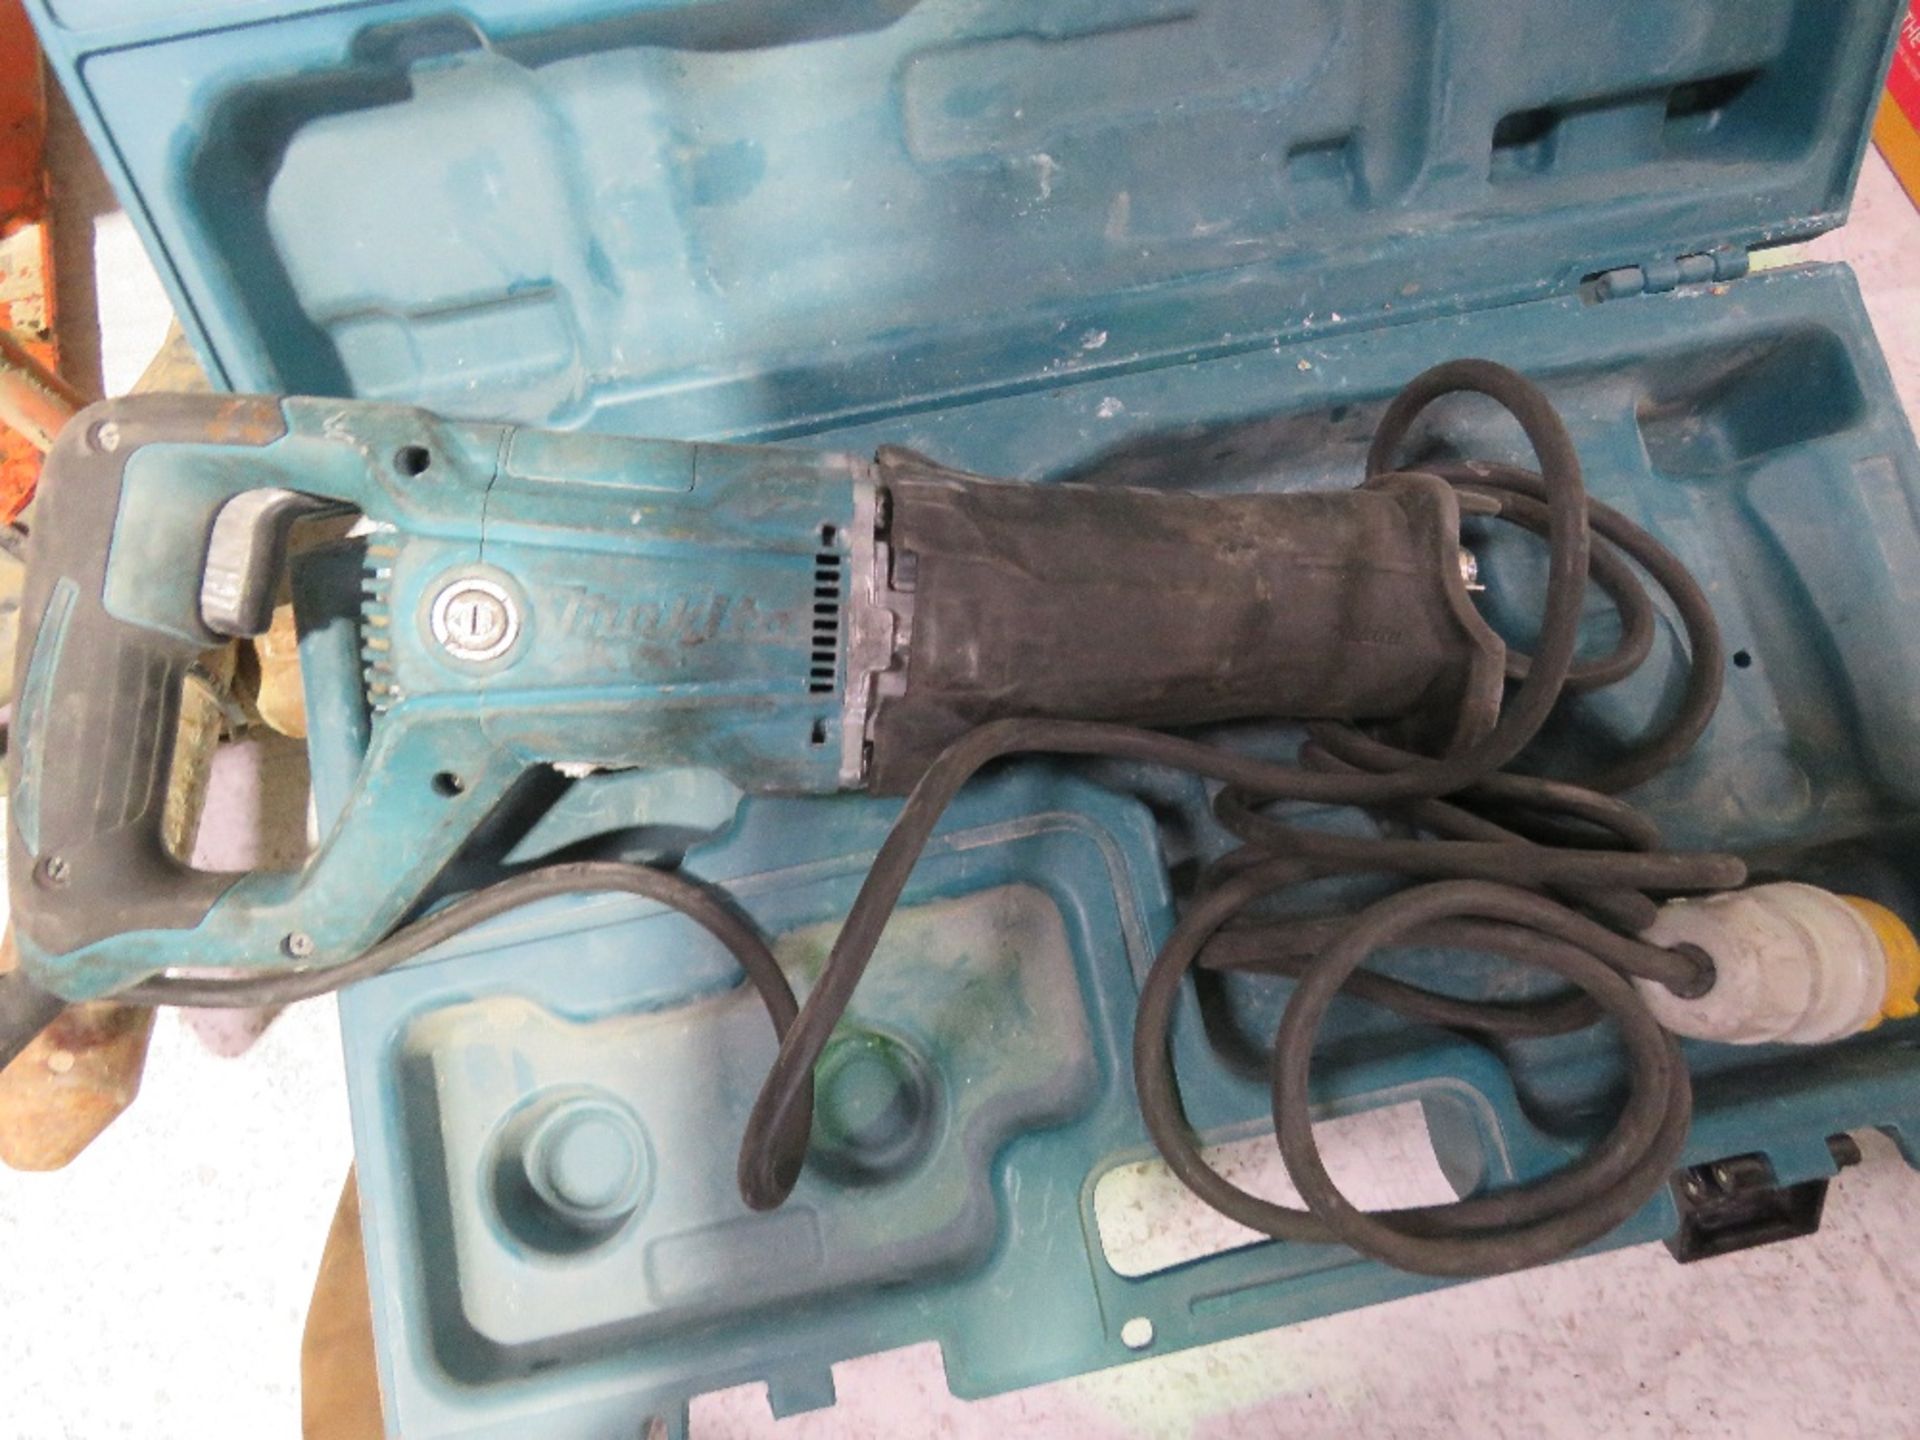 2 X MAKITA 110VOLT POWERED RECIPROCATING SAWS IN CASES THX13945,16388 - Image 2 of 4